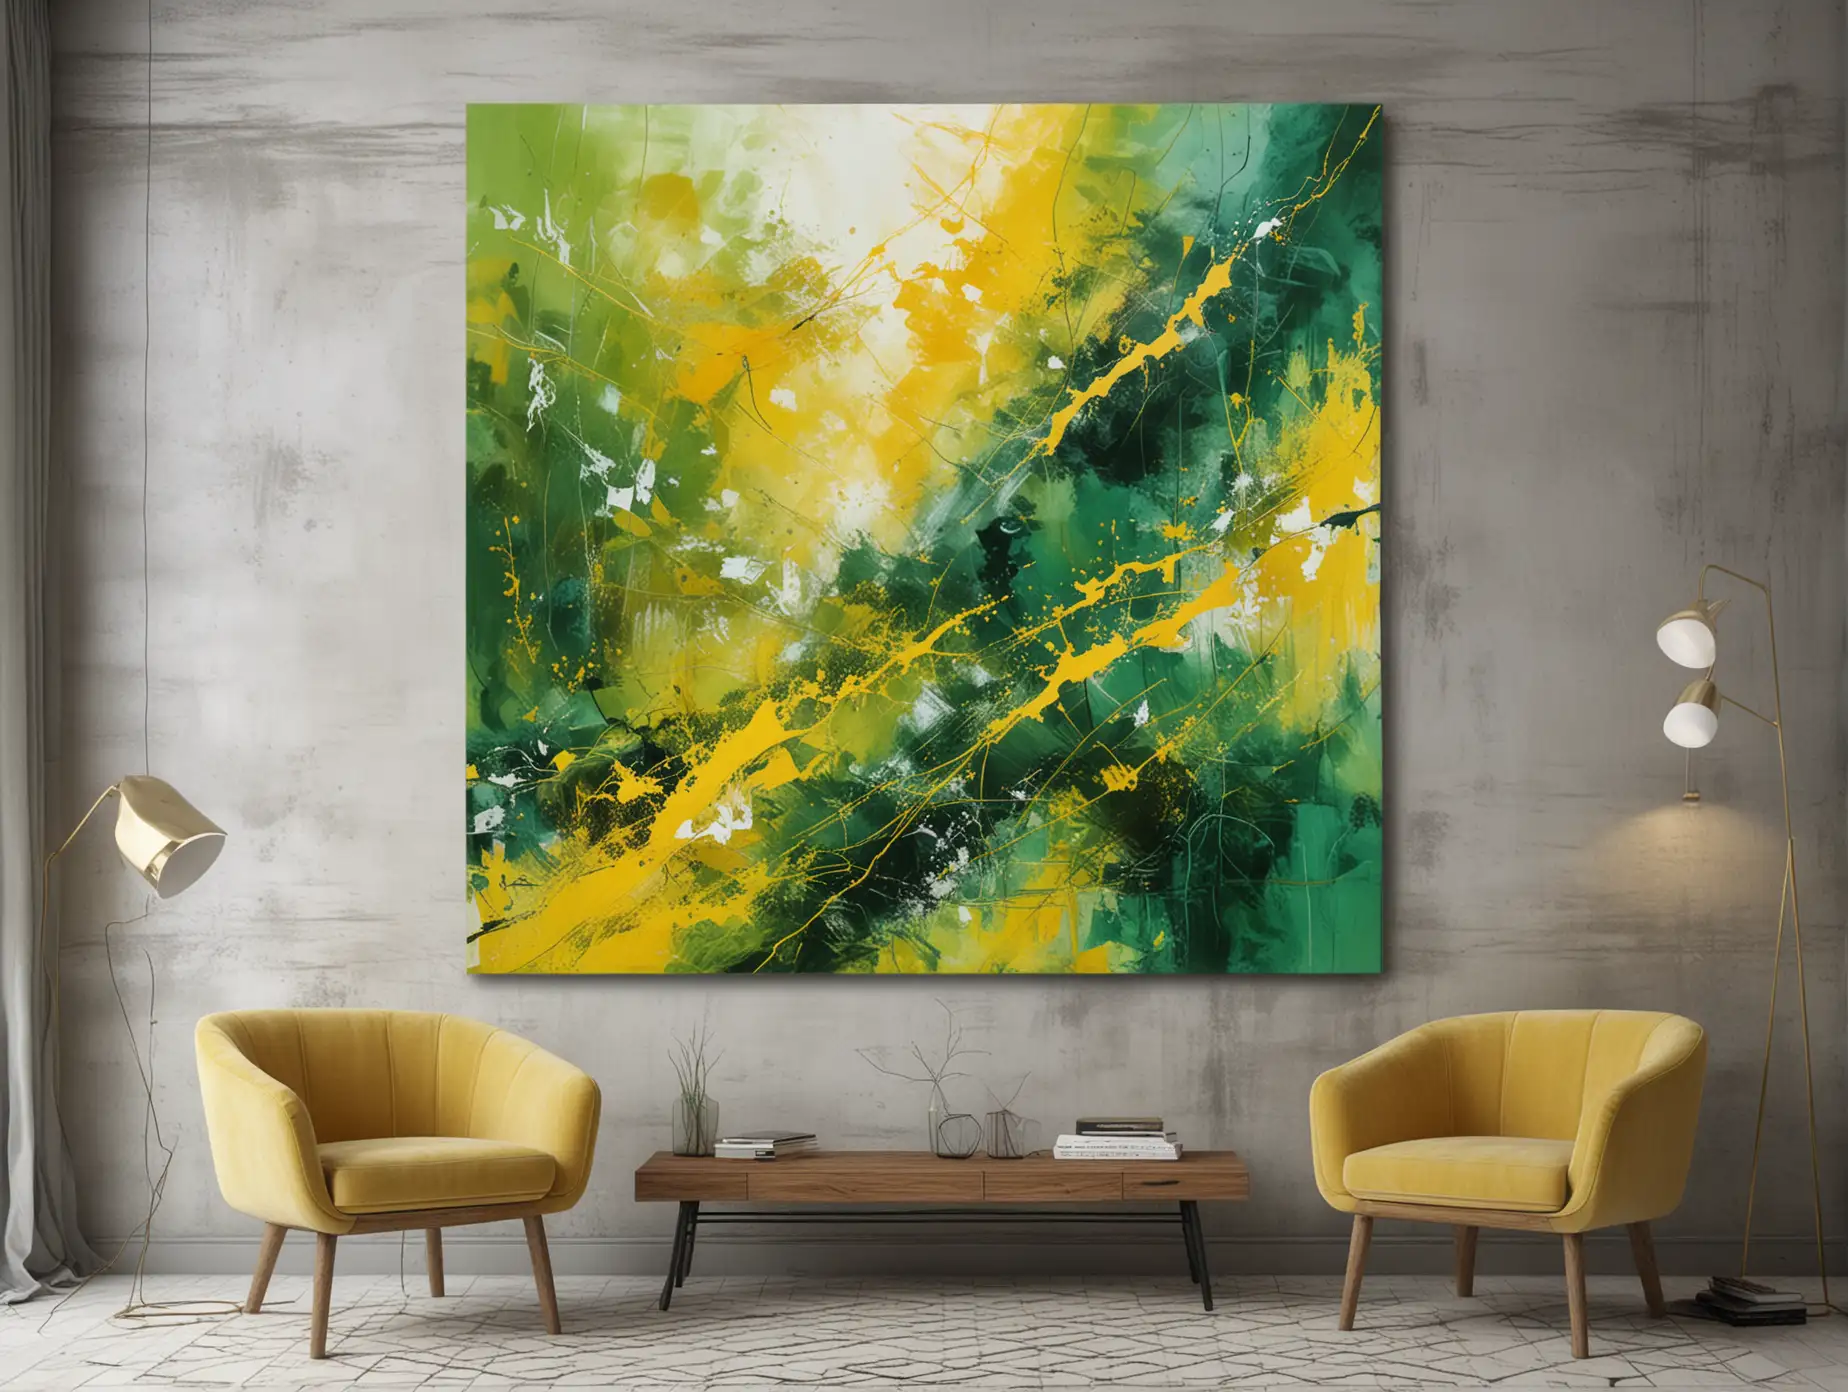 abstract and modern art with green yellow environment
